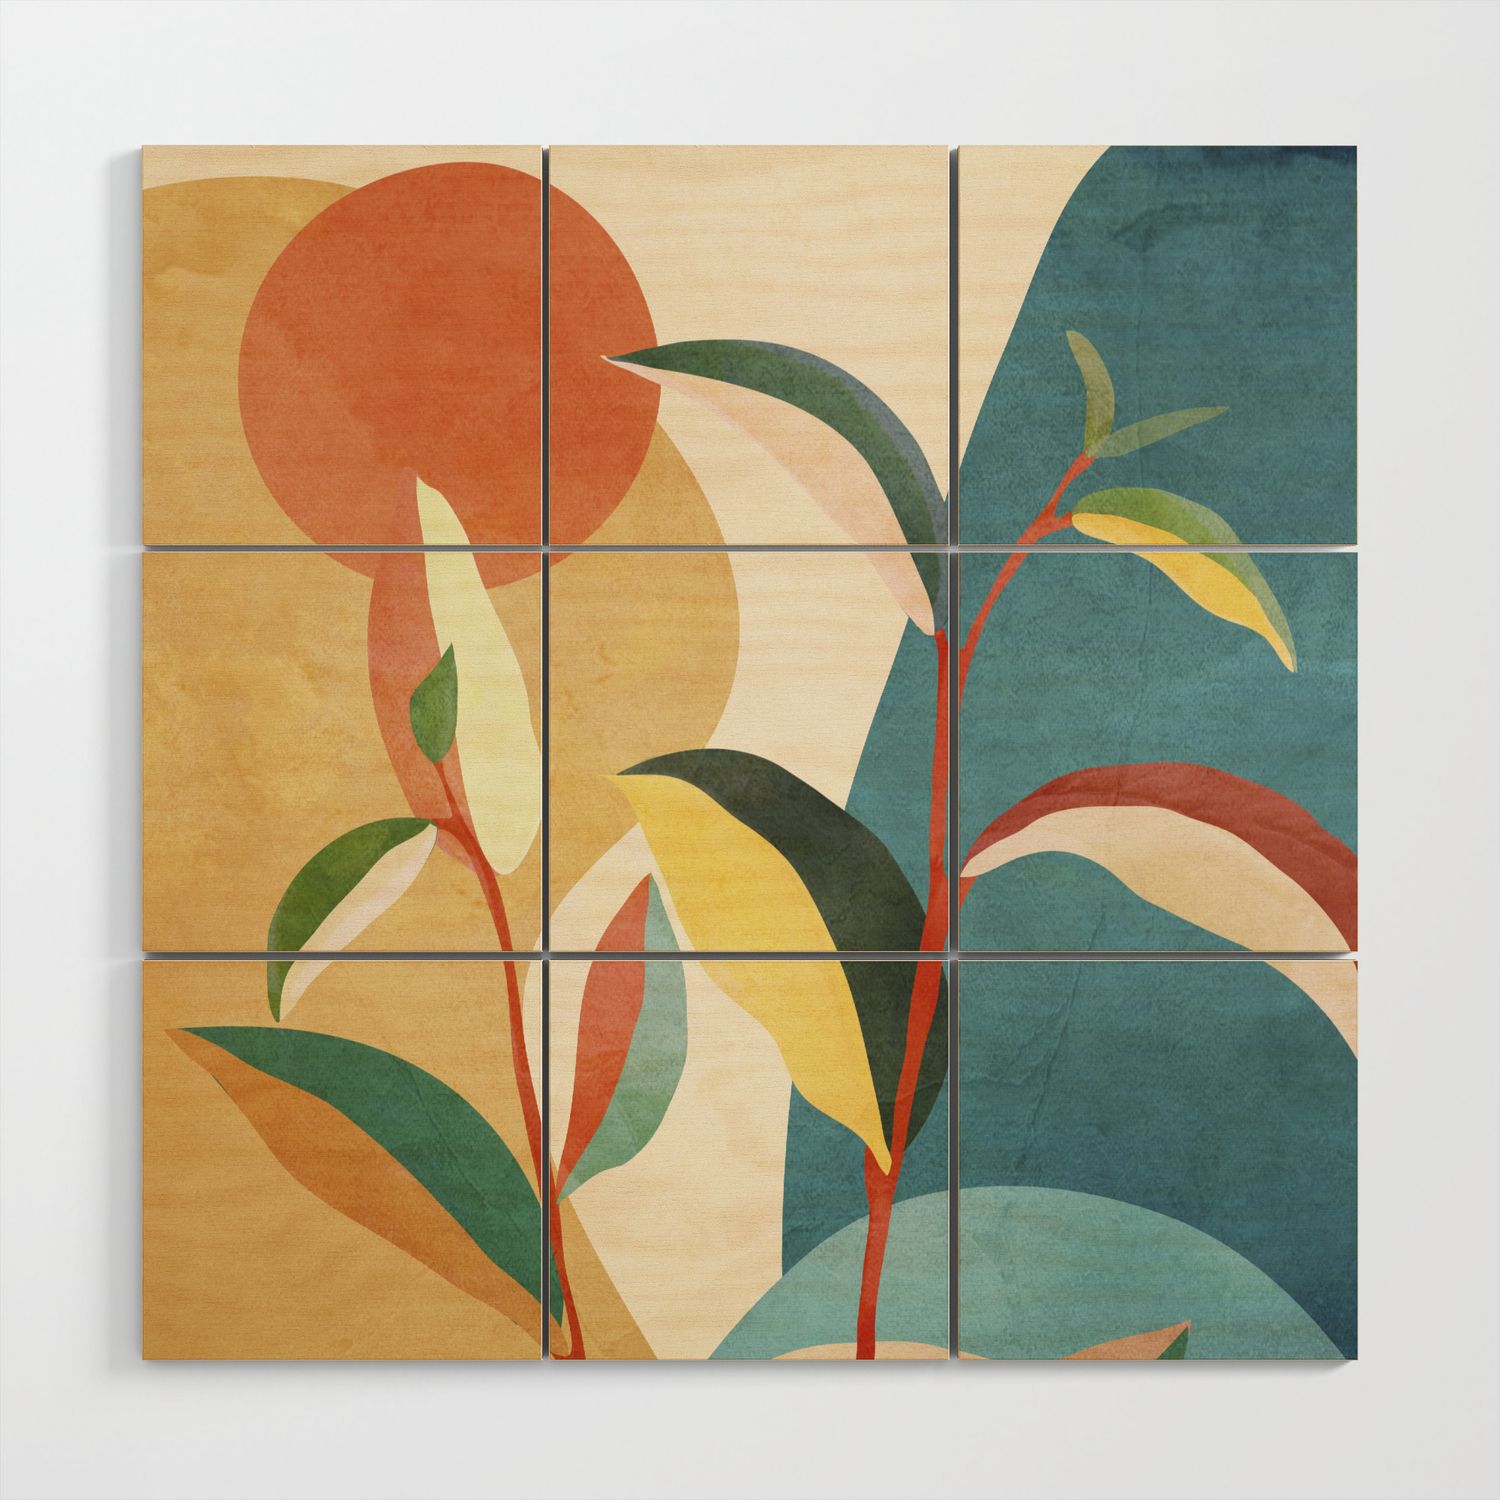 Colorful Branching Out 16 Wood Wall Artcity Art | Society6 Regarding Colorful Branching Wall Art (View 4 of 15)